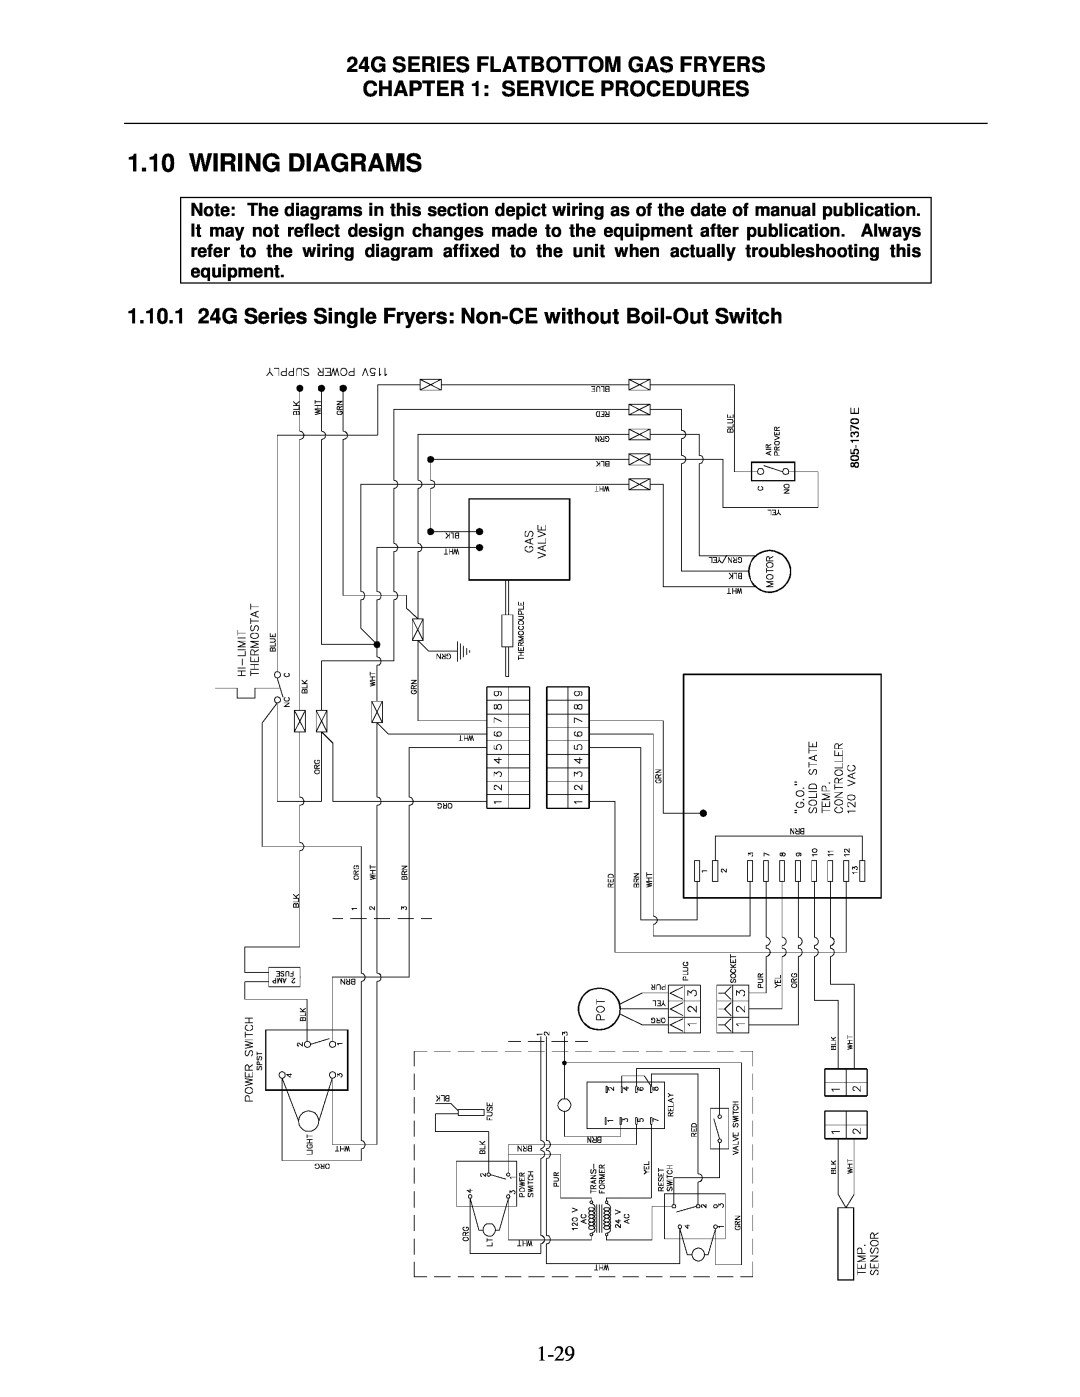 Frymaster 1824/2424G manual Wiring Diagrams, 1.10.1 24G Series Single Fryers Non-CE without Boil-Out Switch, 805-1370 E 